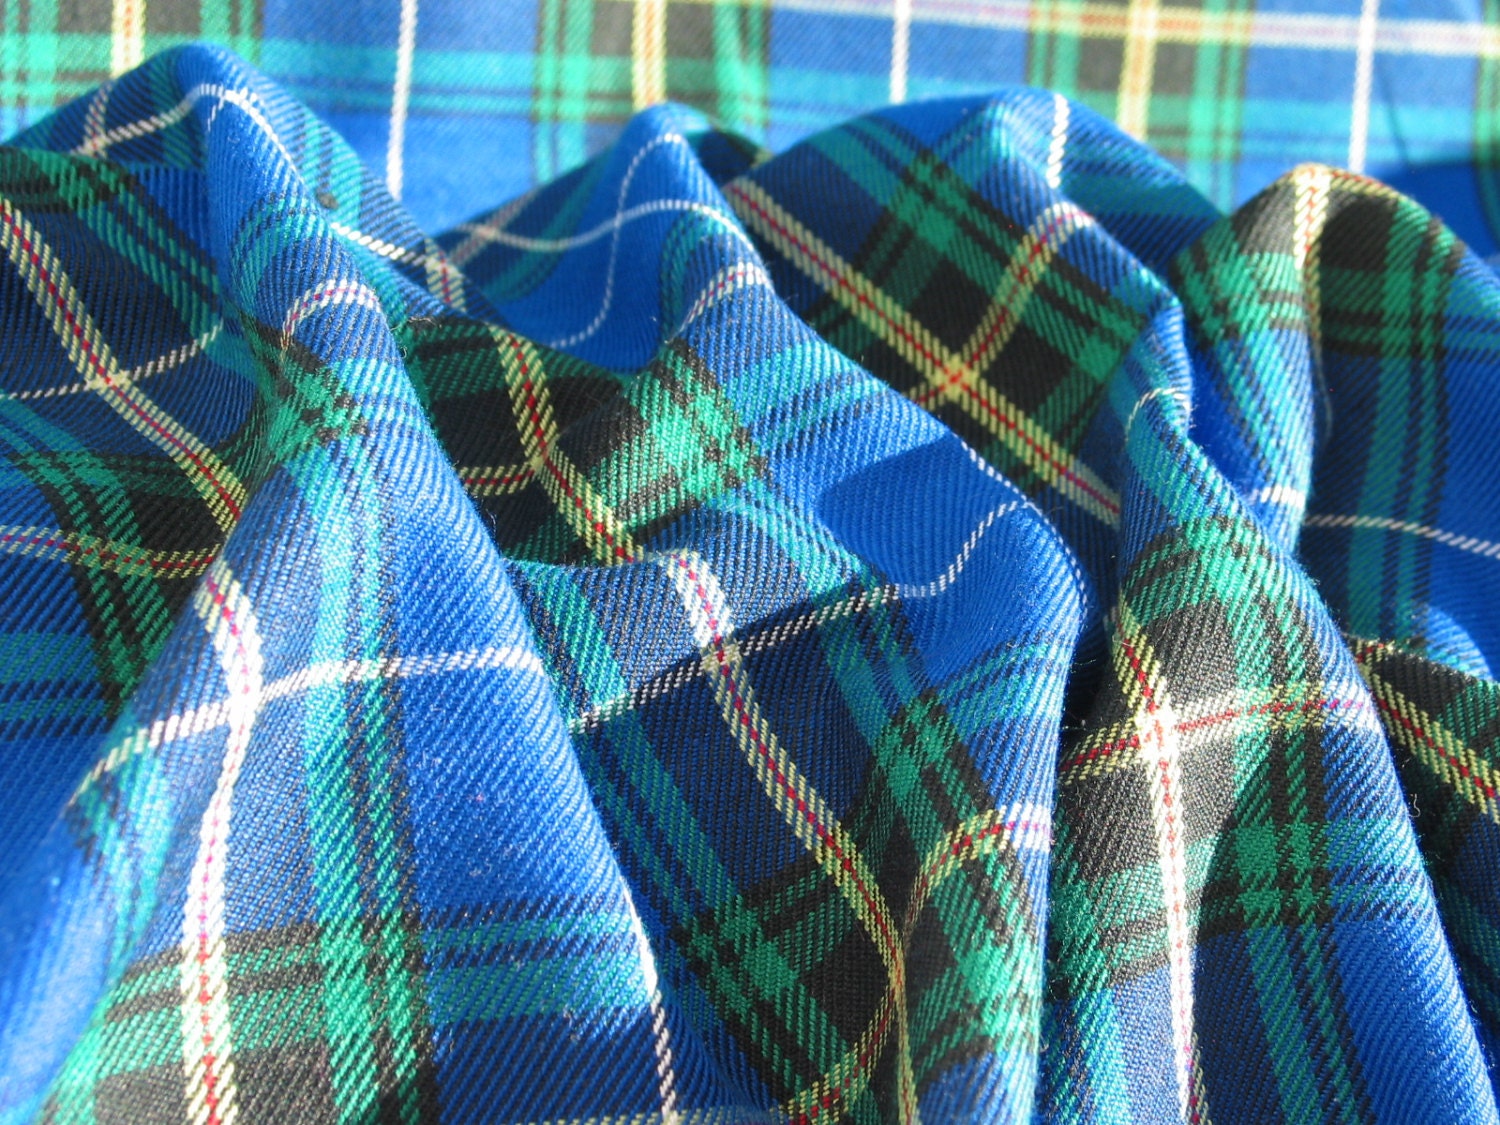 Fabric, Nova Scotia Tartan Fabric A Blue and White Plaid Material, Canadian Tartan  Fabric for Accessories and Home Décor Material 